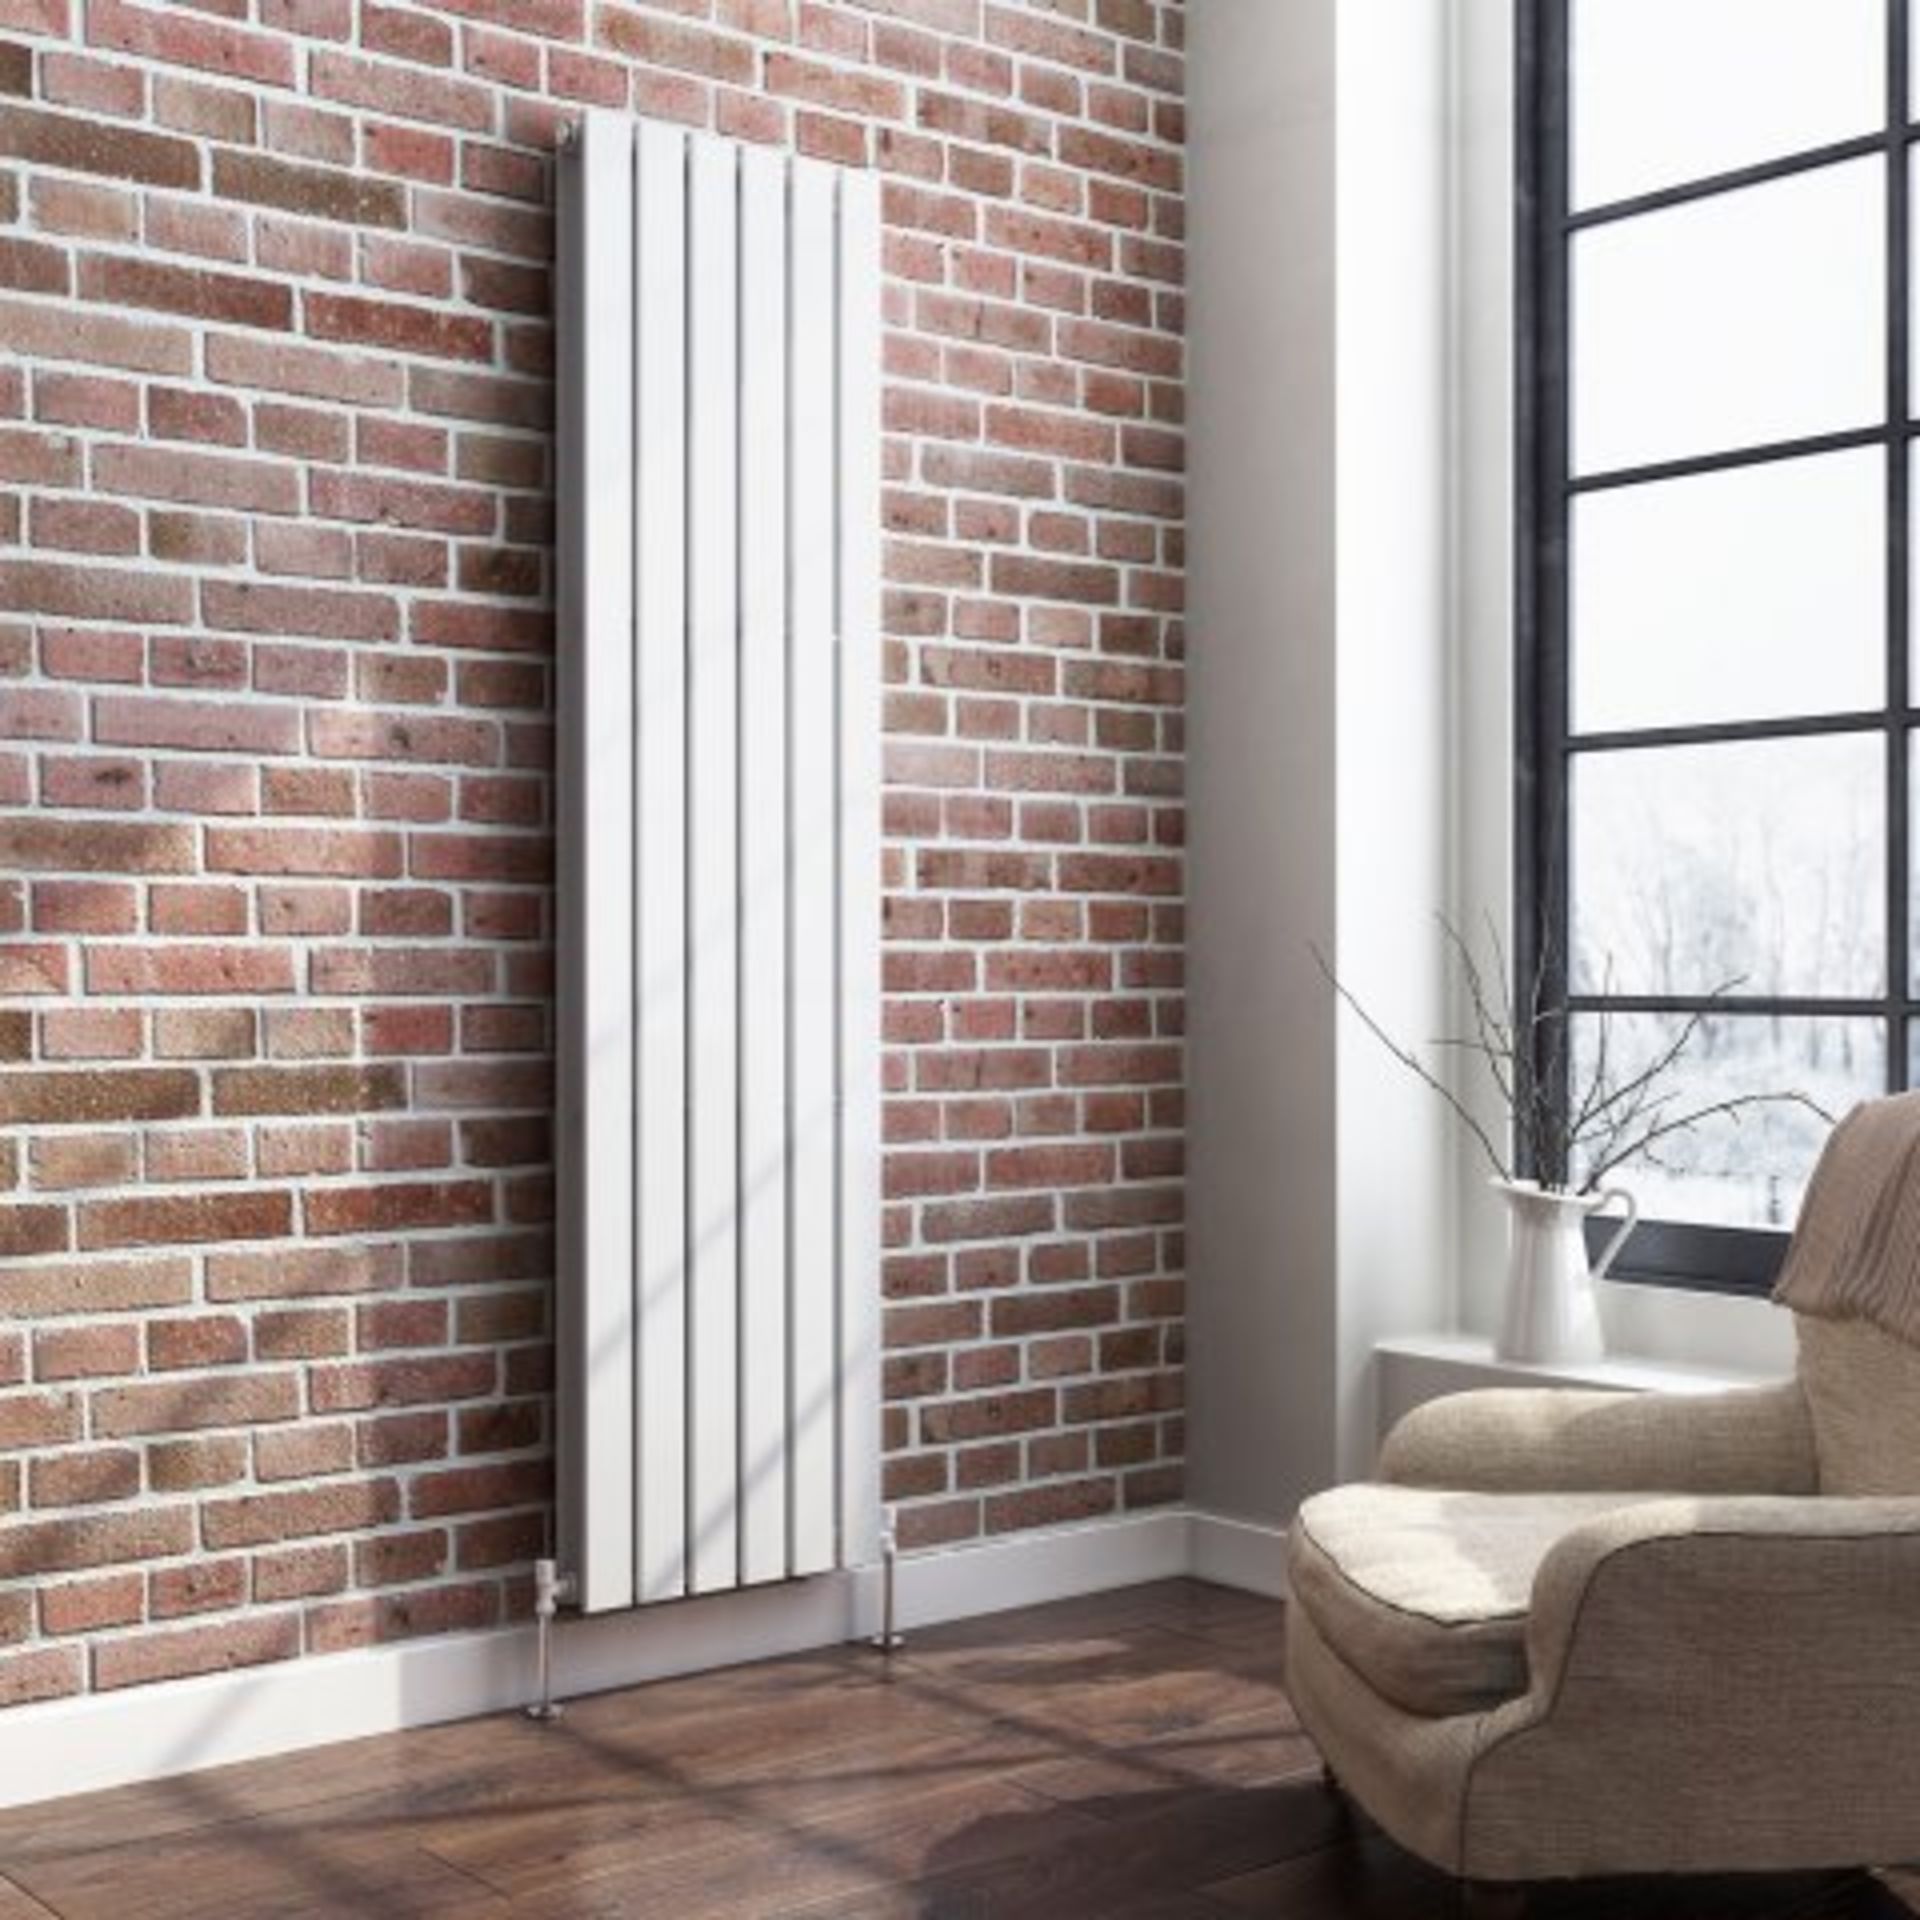 (A41) 1800x452mm Gloss White Double Flat Panel Vertical Radiator - Thera Range. RRP £499.99. - Image 4 of 4